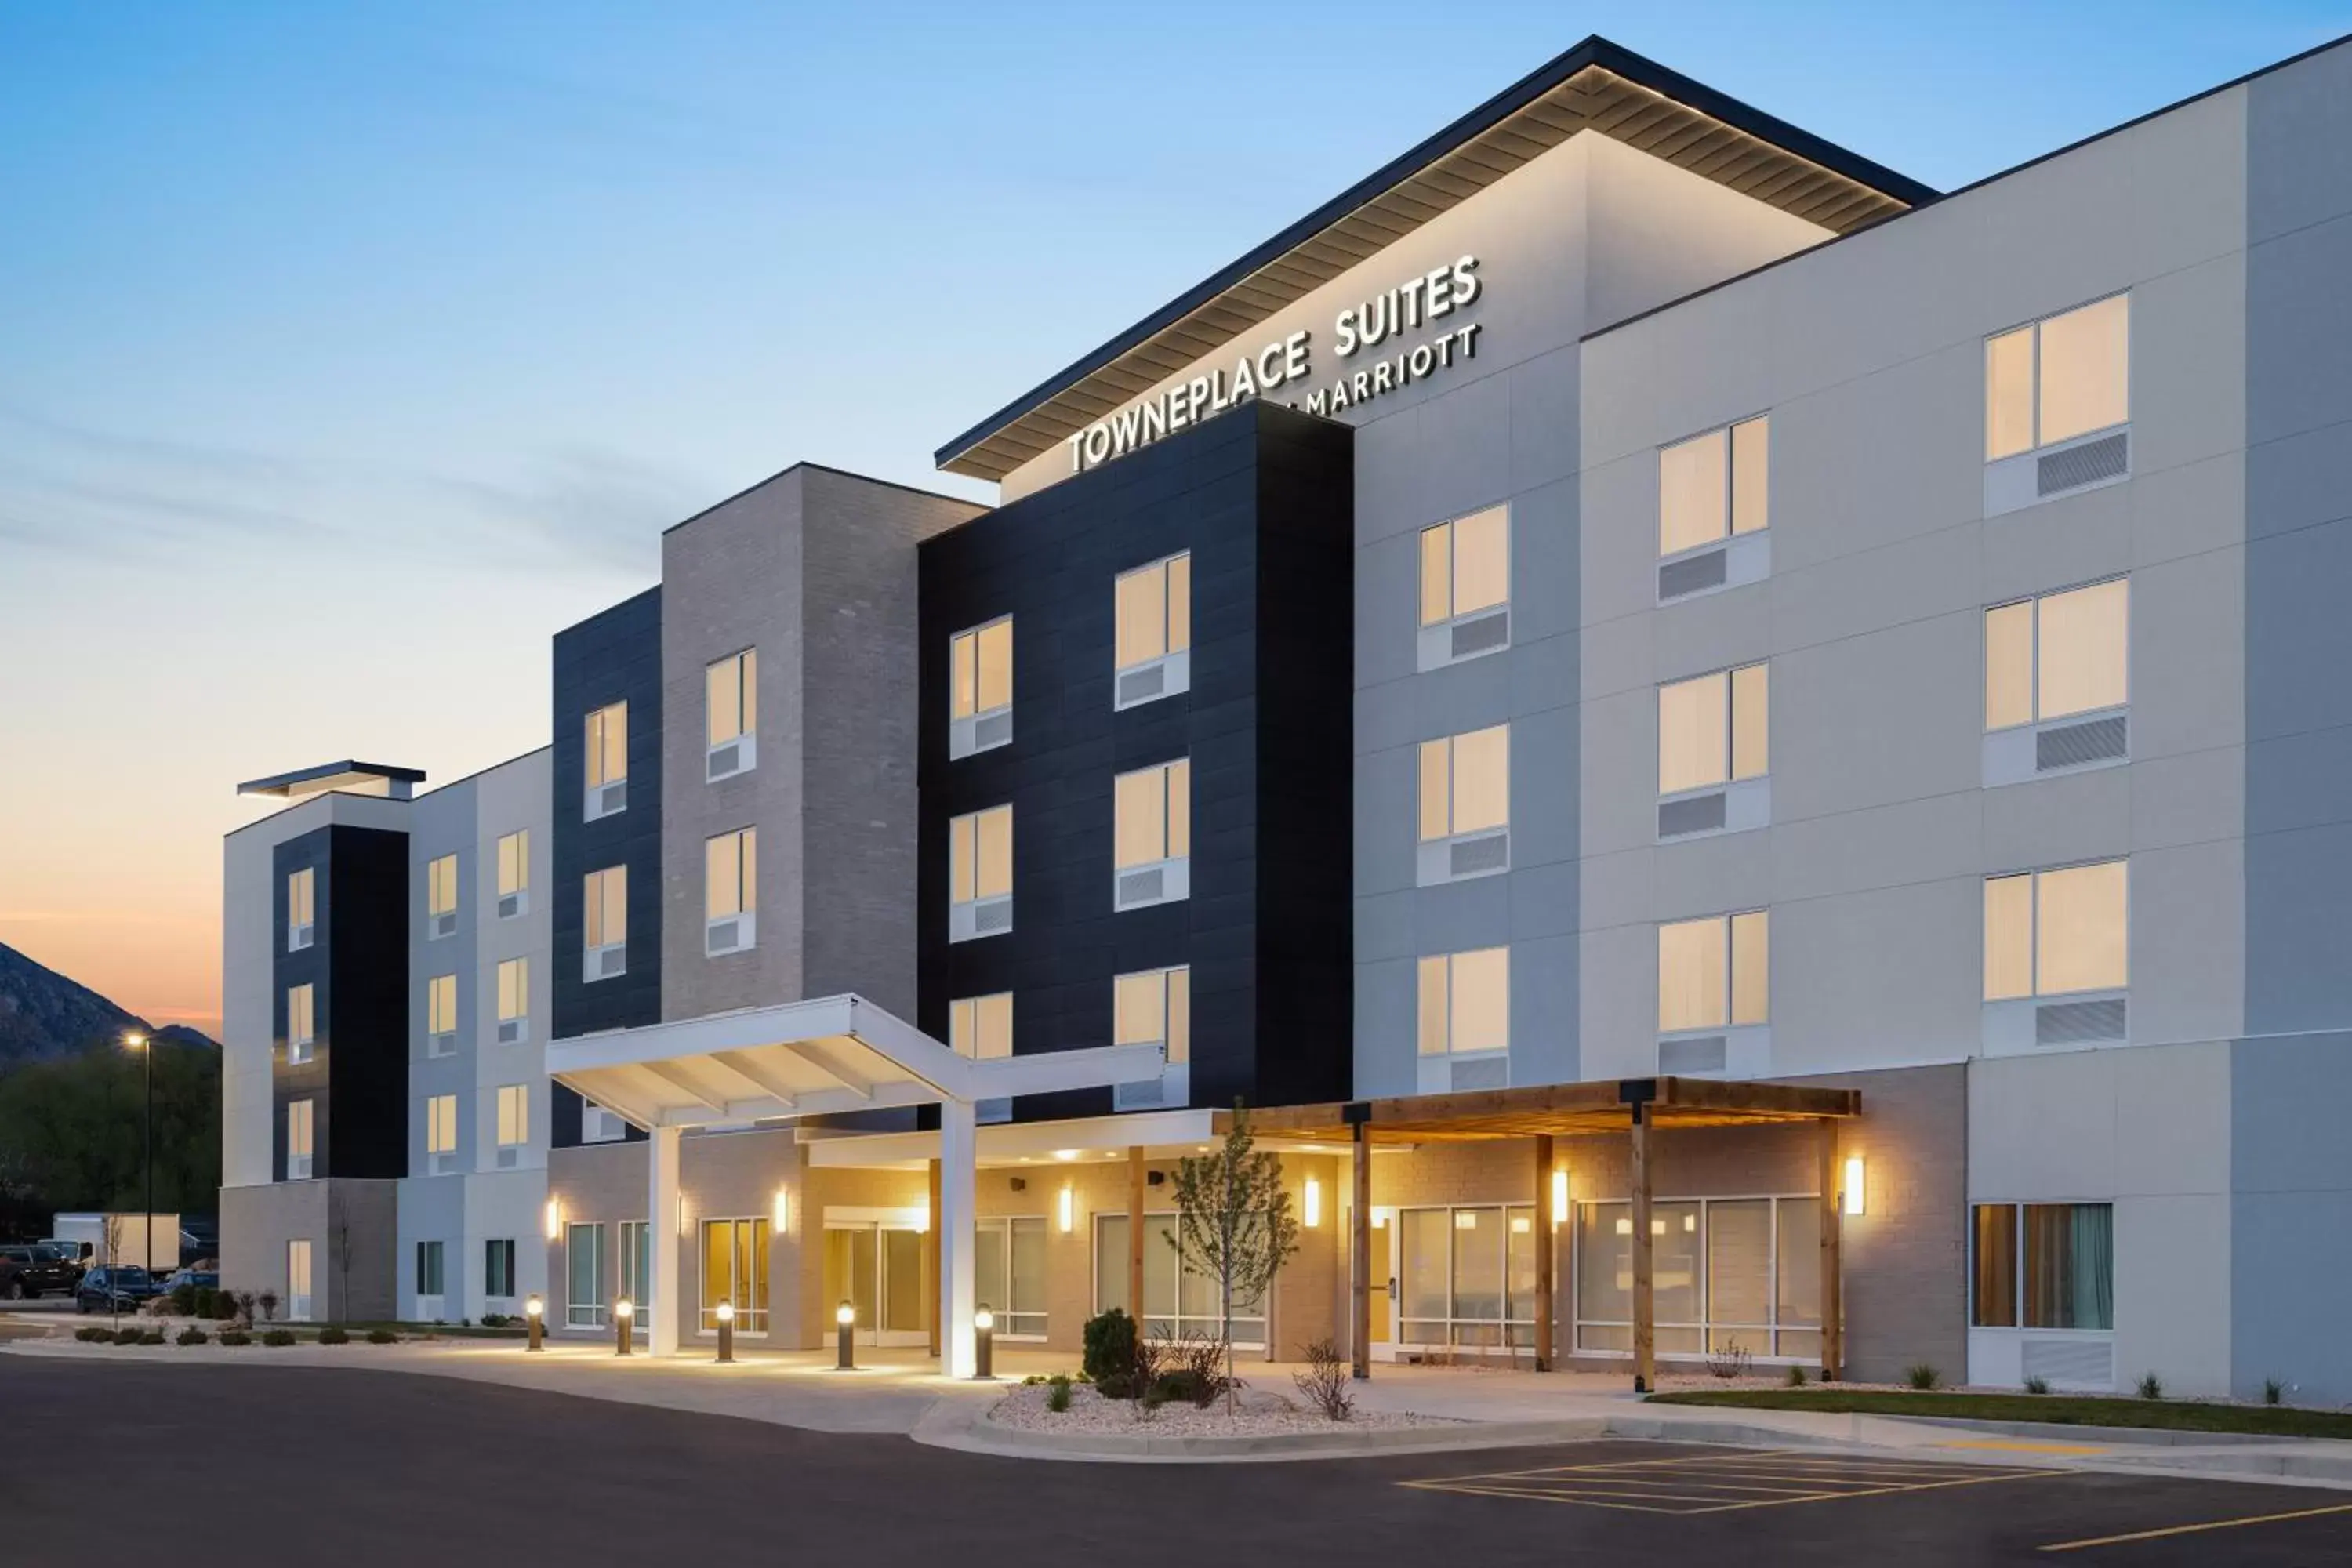 Property Building in TownePlace Suites by Marriott Logan